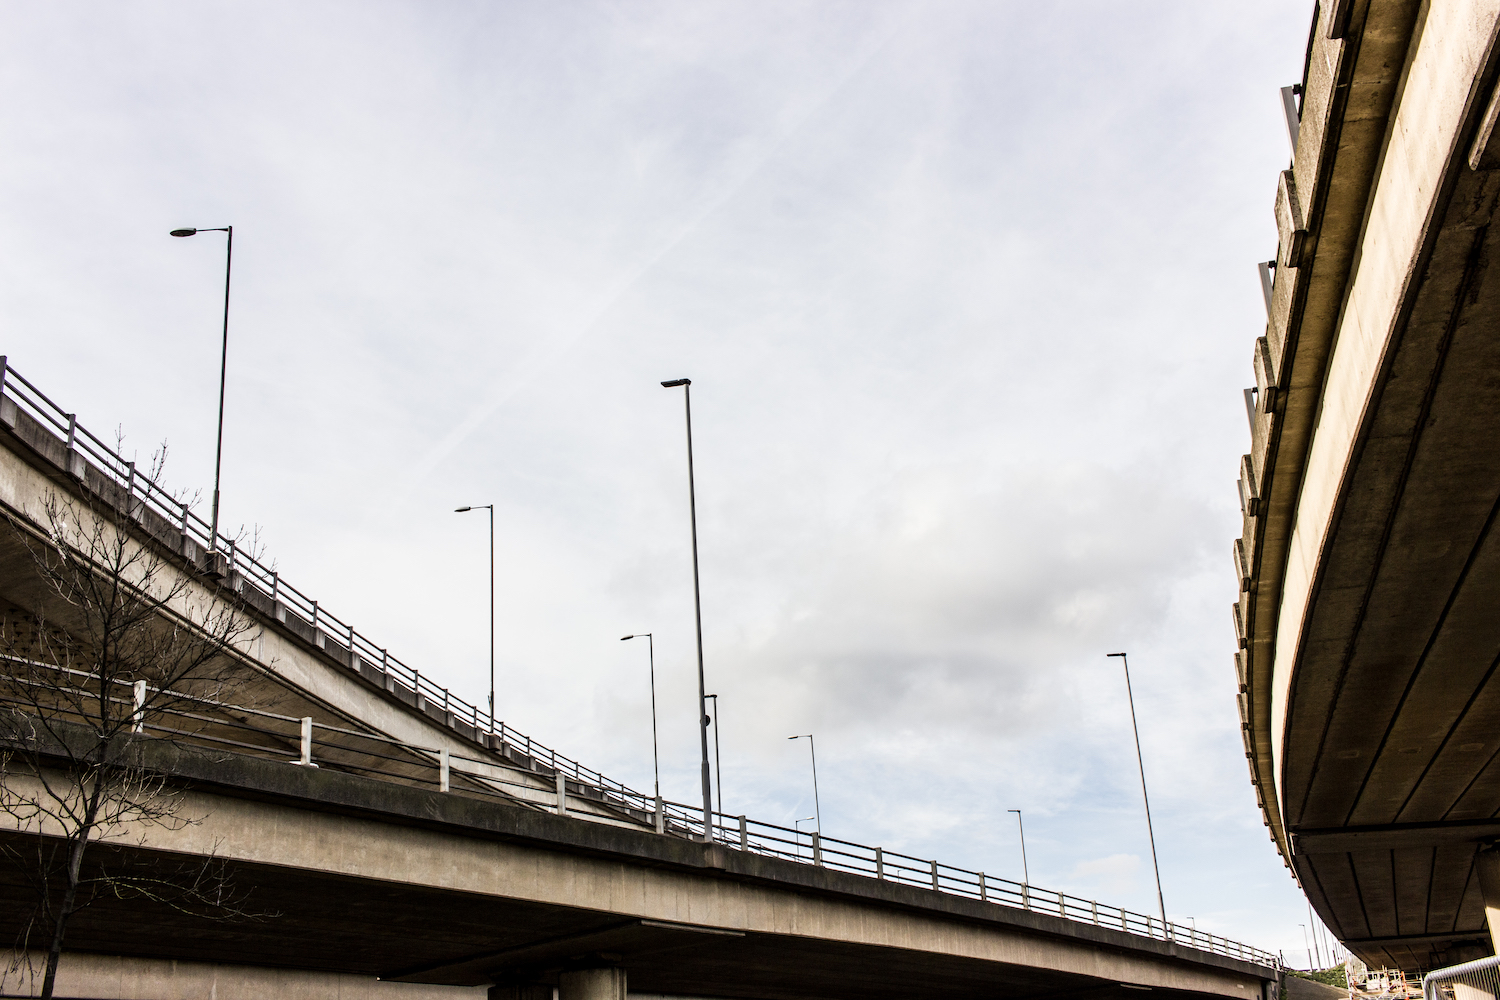 Professional Photography Concrete Roundabout In South Woodford North East London With Three Overpasses And Blue Sky